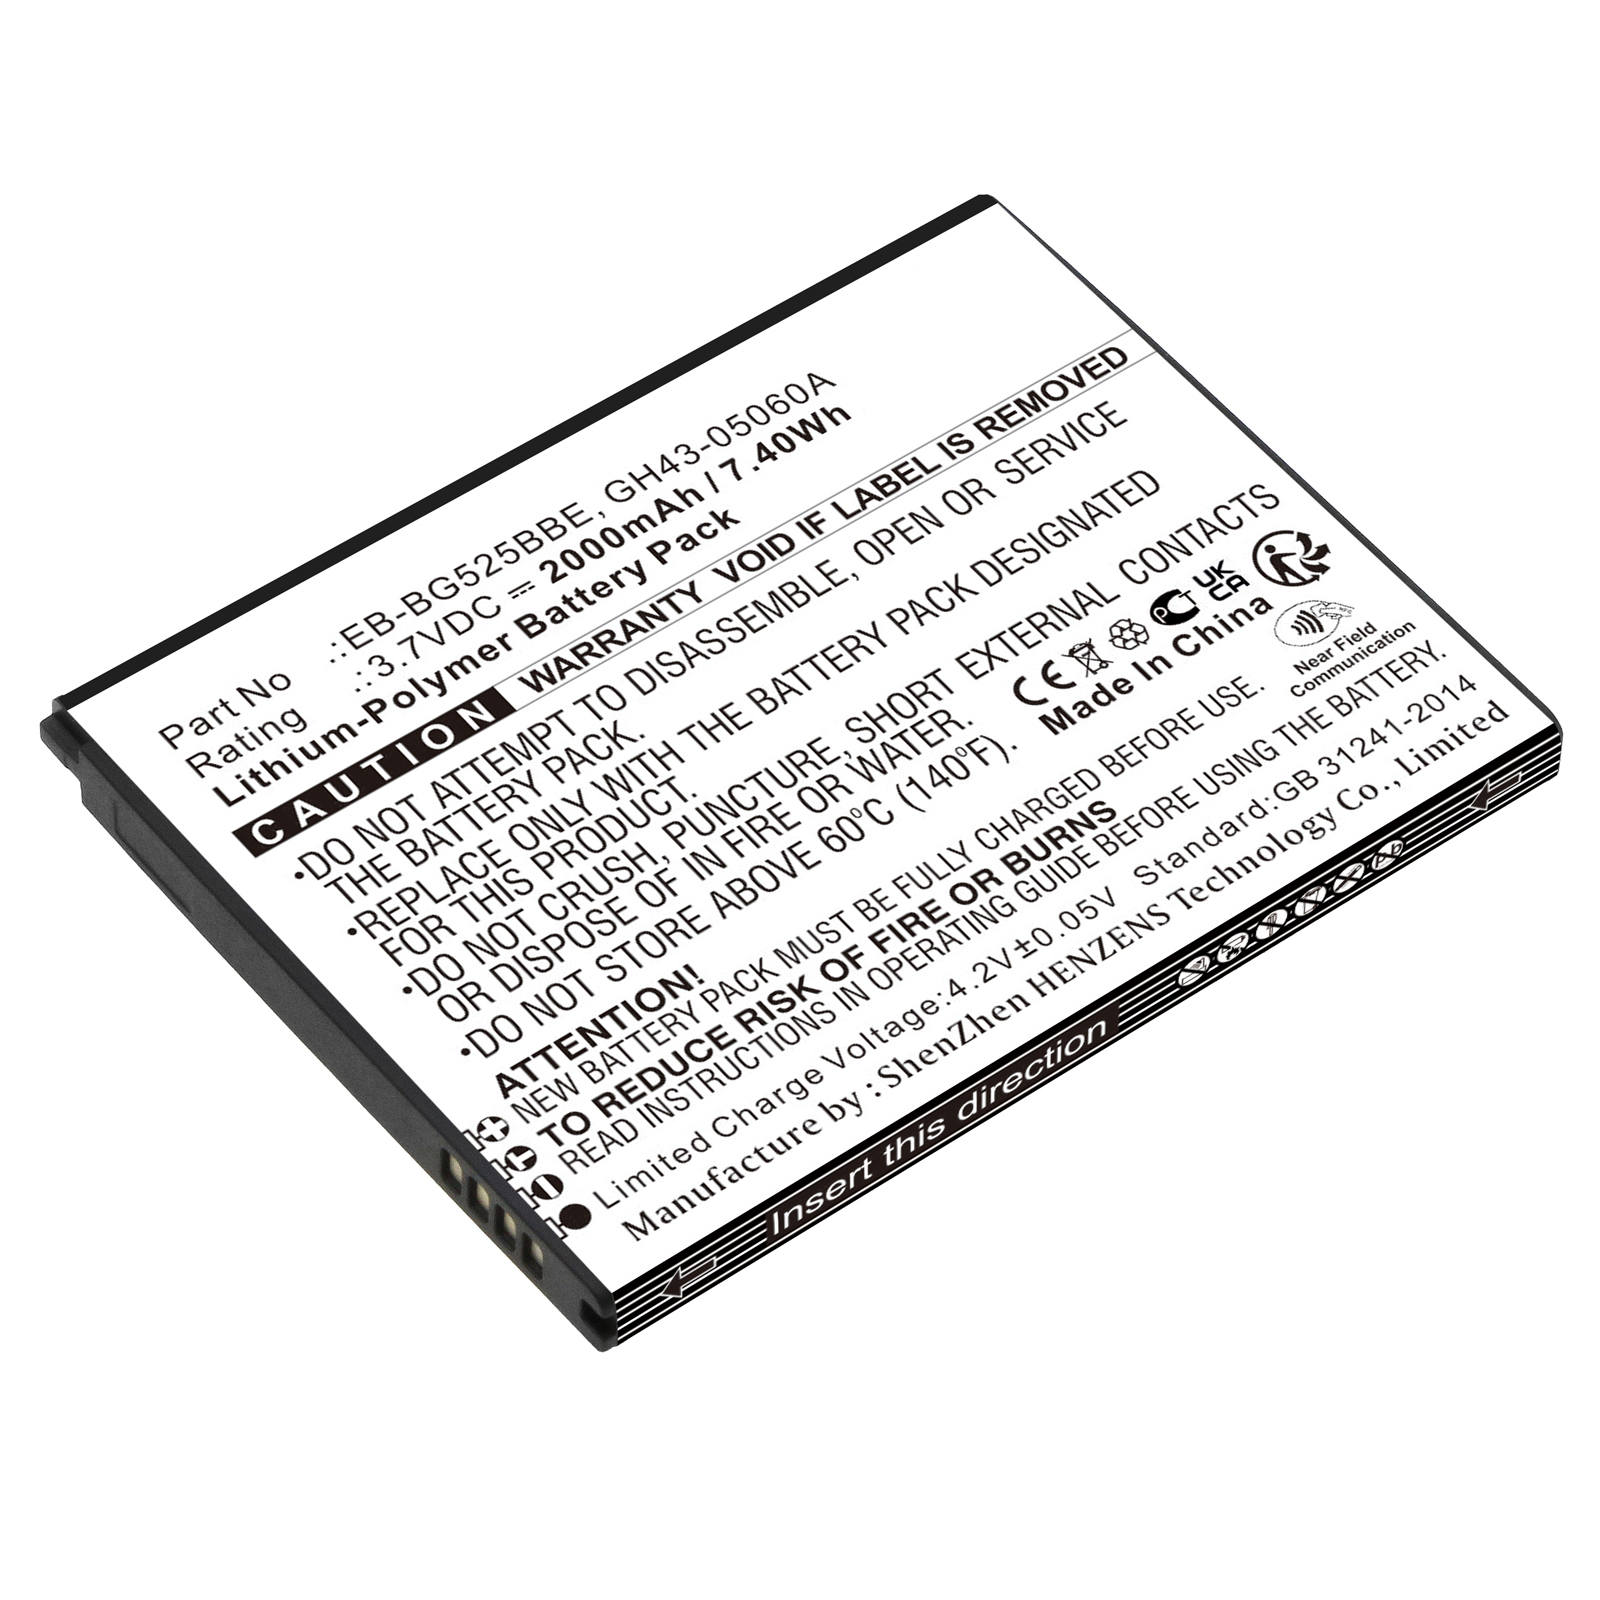 Synergy Digital Cell Phone Battery, Compatible with Samsung EB-BG525BBE Cell Phone Battery (Li-Pol, 3.7V, 2000mAh)